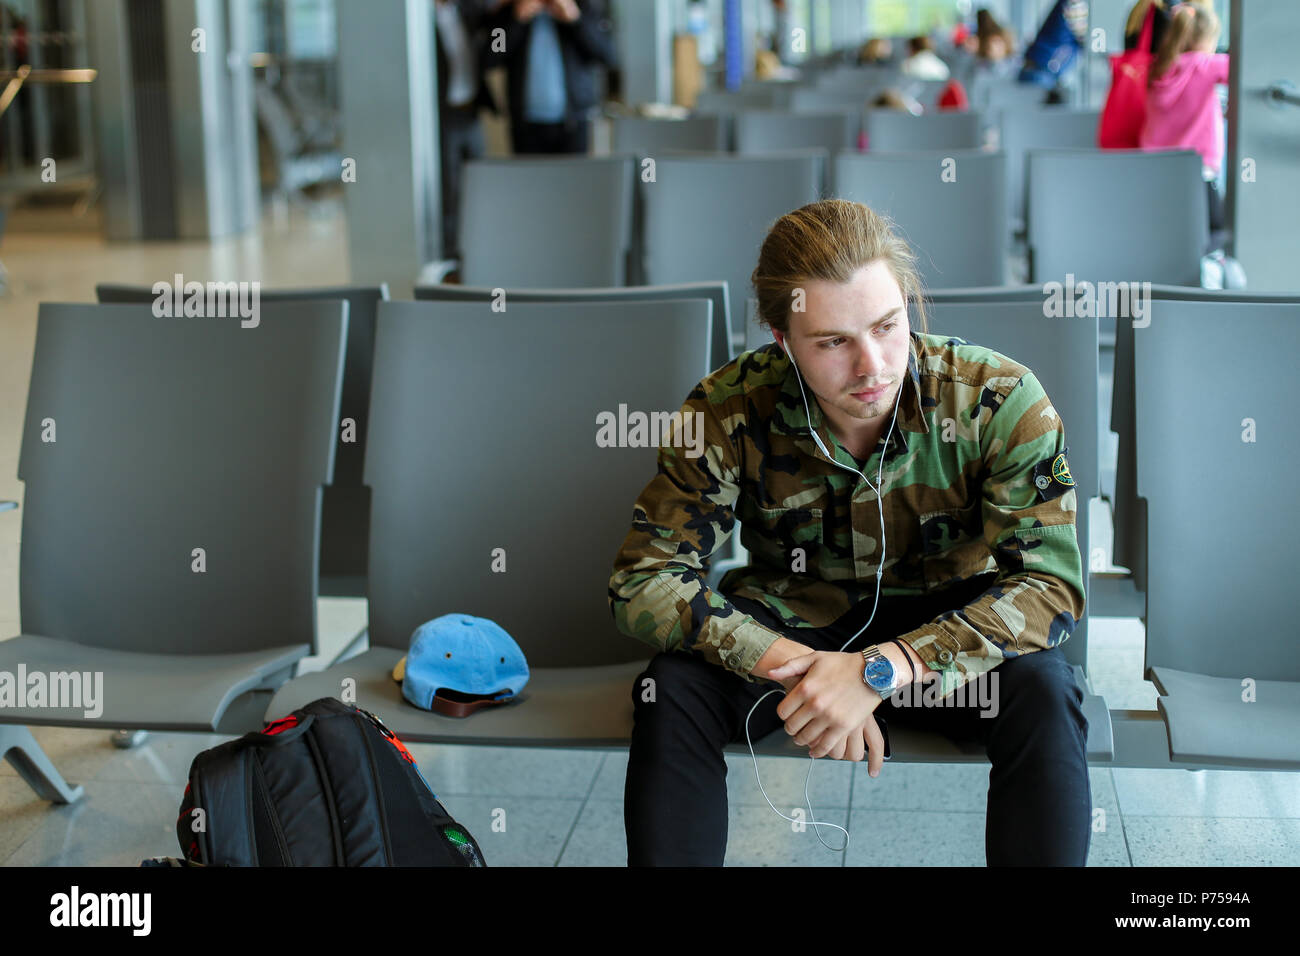 Caucasian male student sitting in waiting room at airport and listening to music. Stock Photo